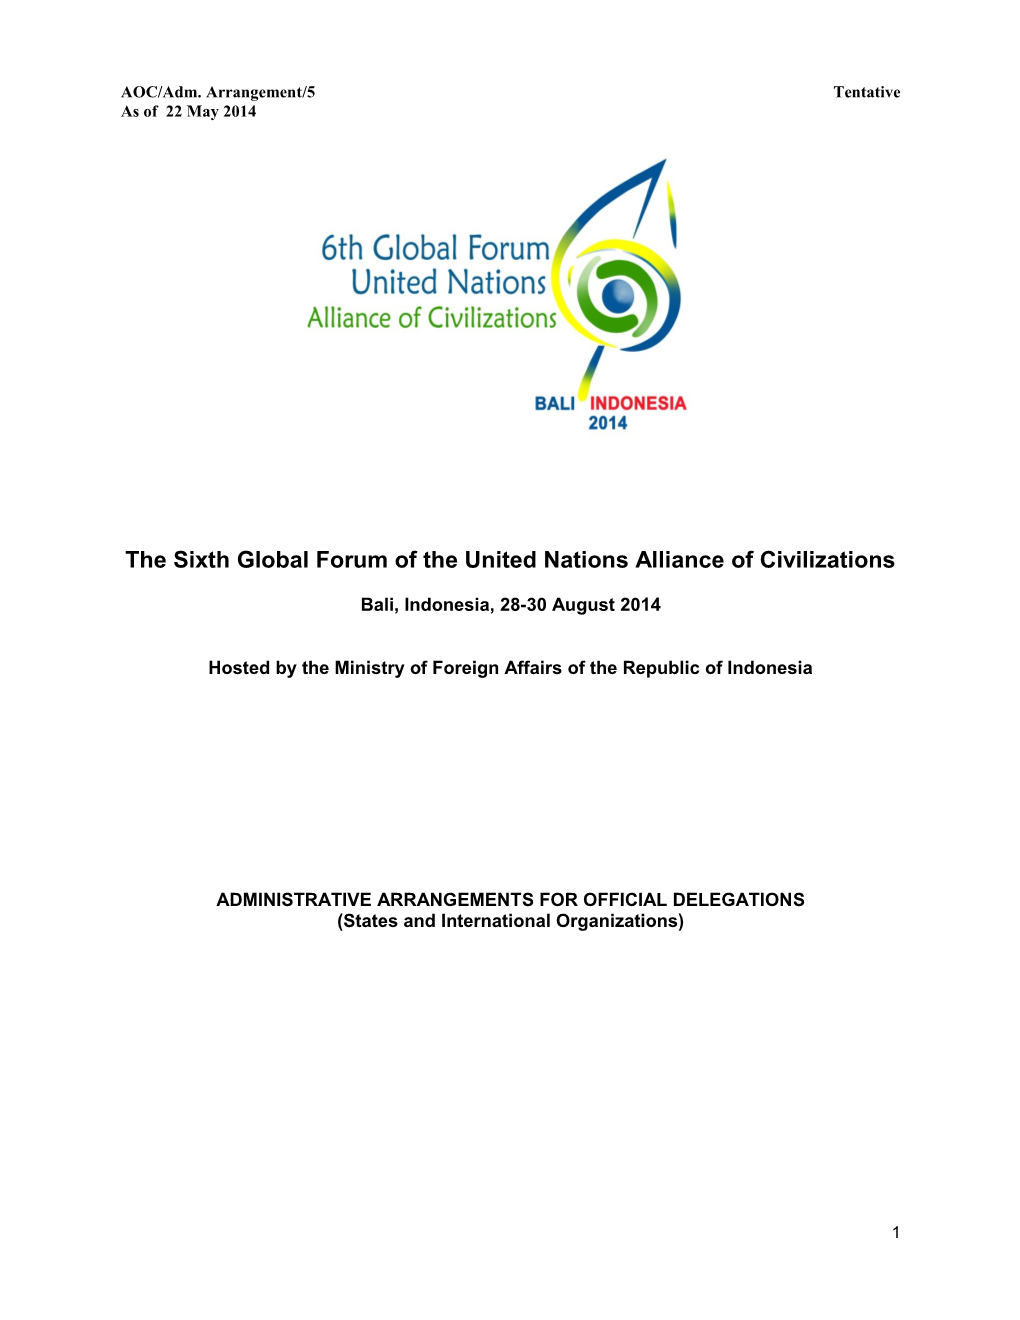 The Sixth Global Forum of the United Nations Alliance of Civilizations